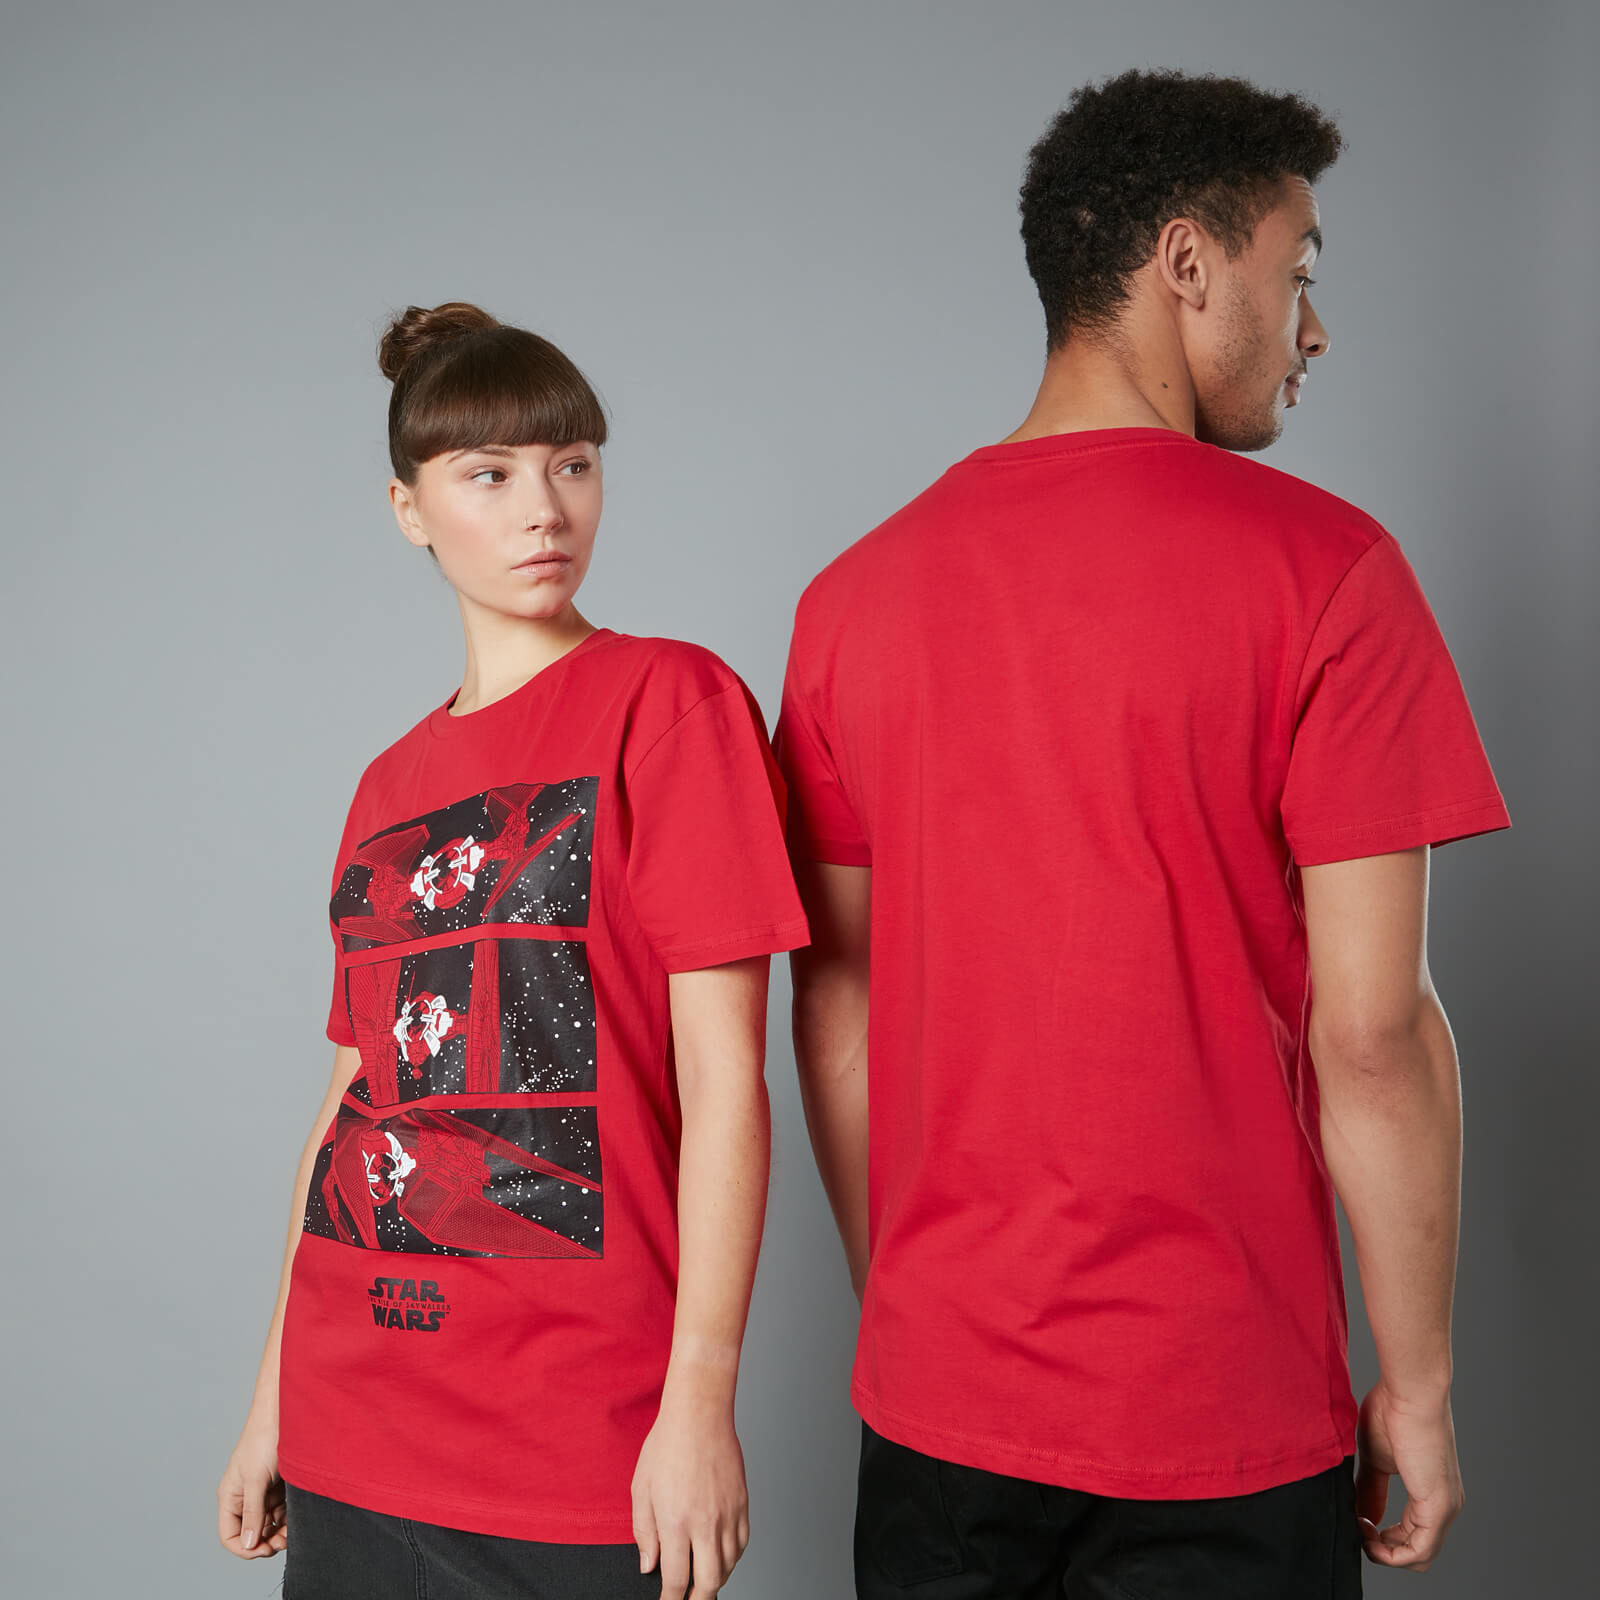 The Rise of Skywalker Tie Fighter Unisex T-Shirt - Red - XS